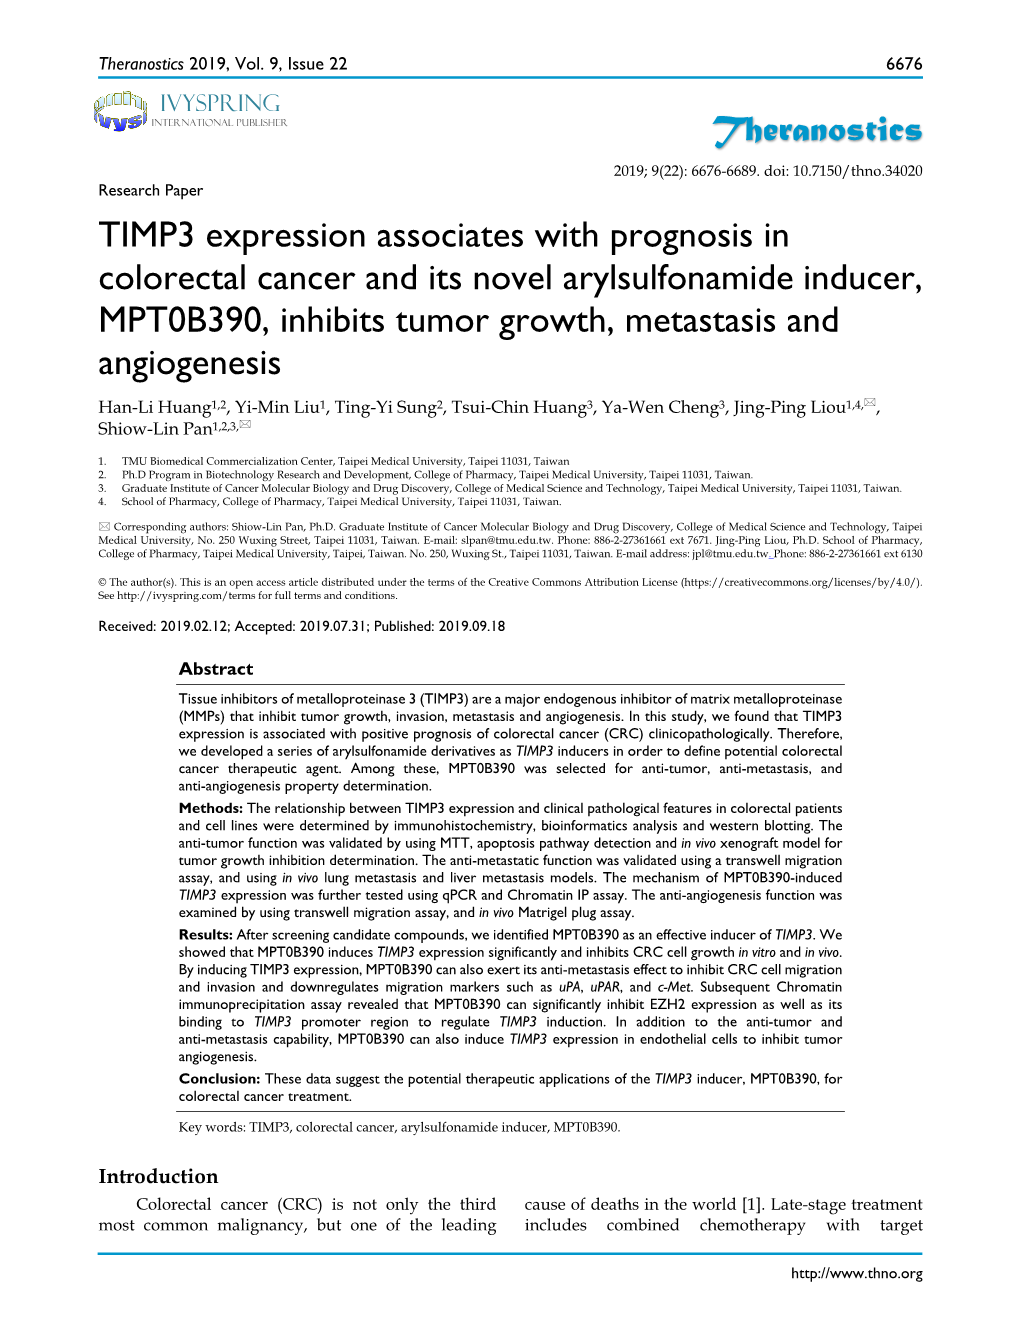 Theranostics TIMP3 Expression Associates with Prognosis In